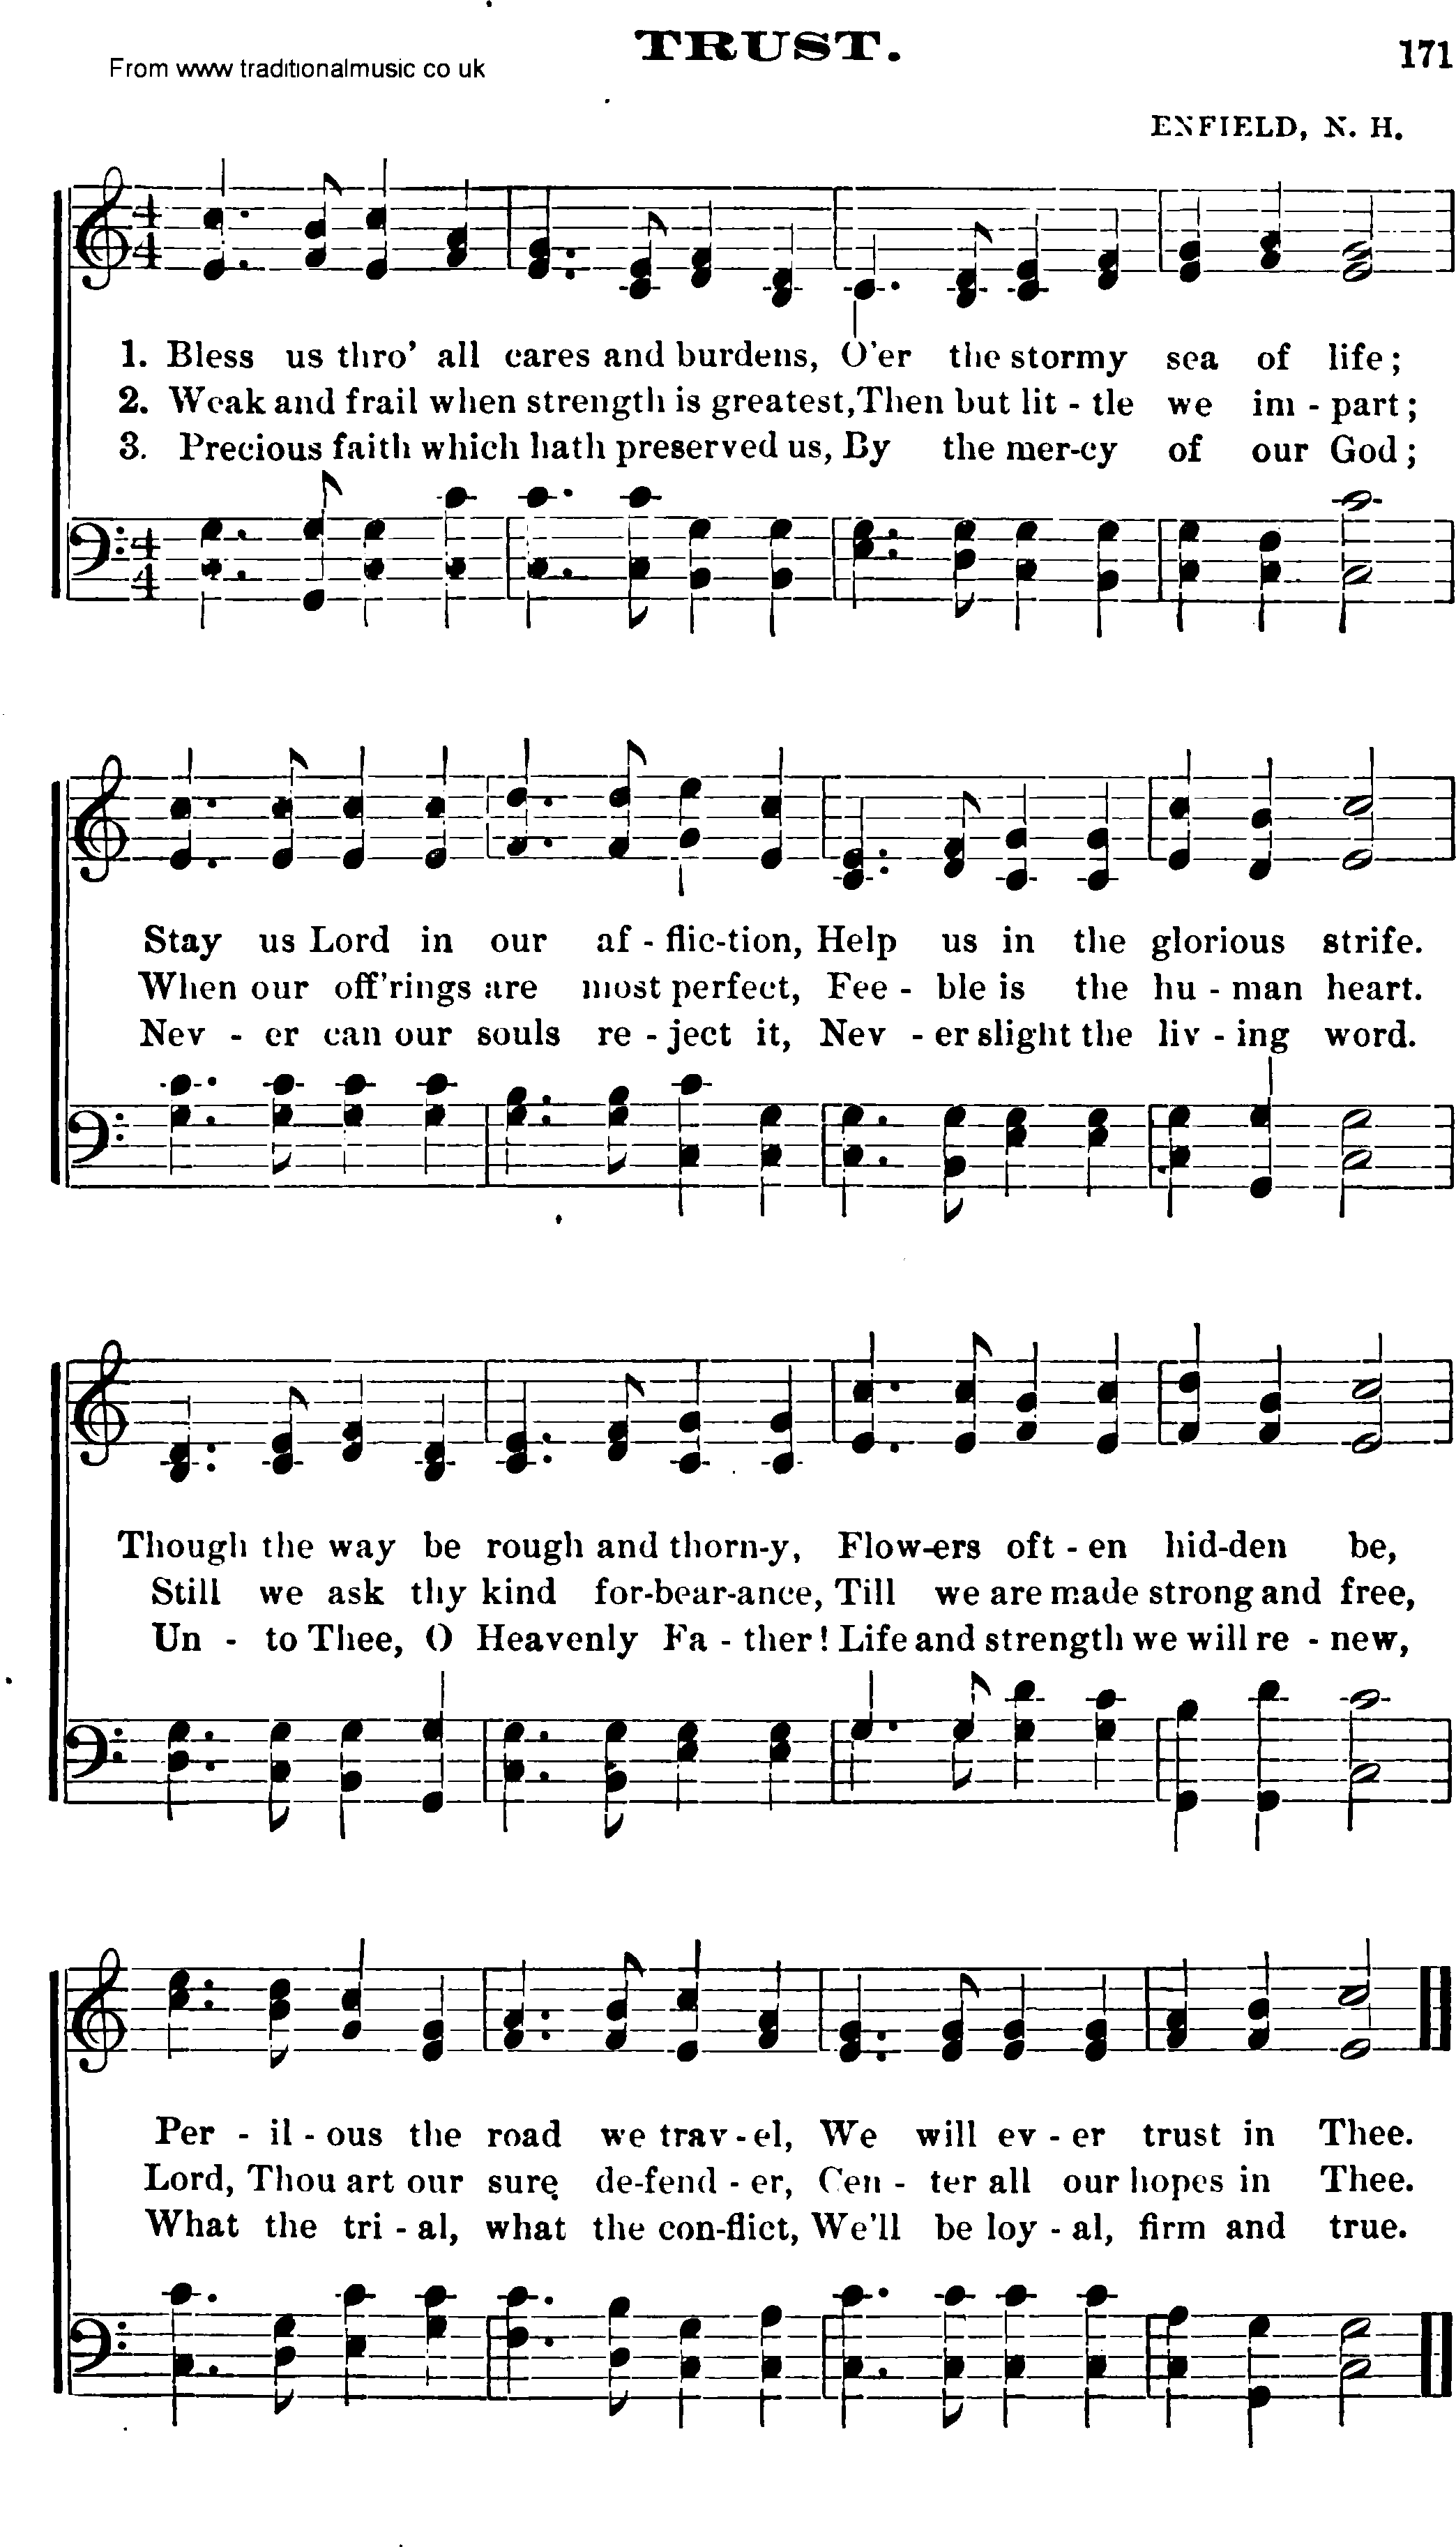 Shaker Music collection, Hymn: Trust, sheetmusic and PDF